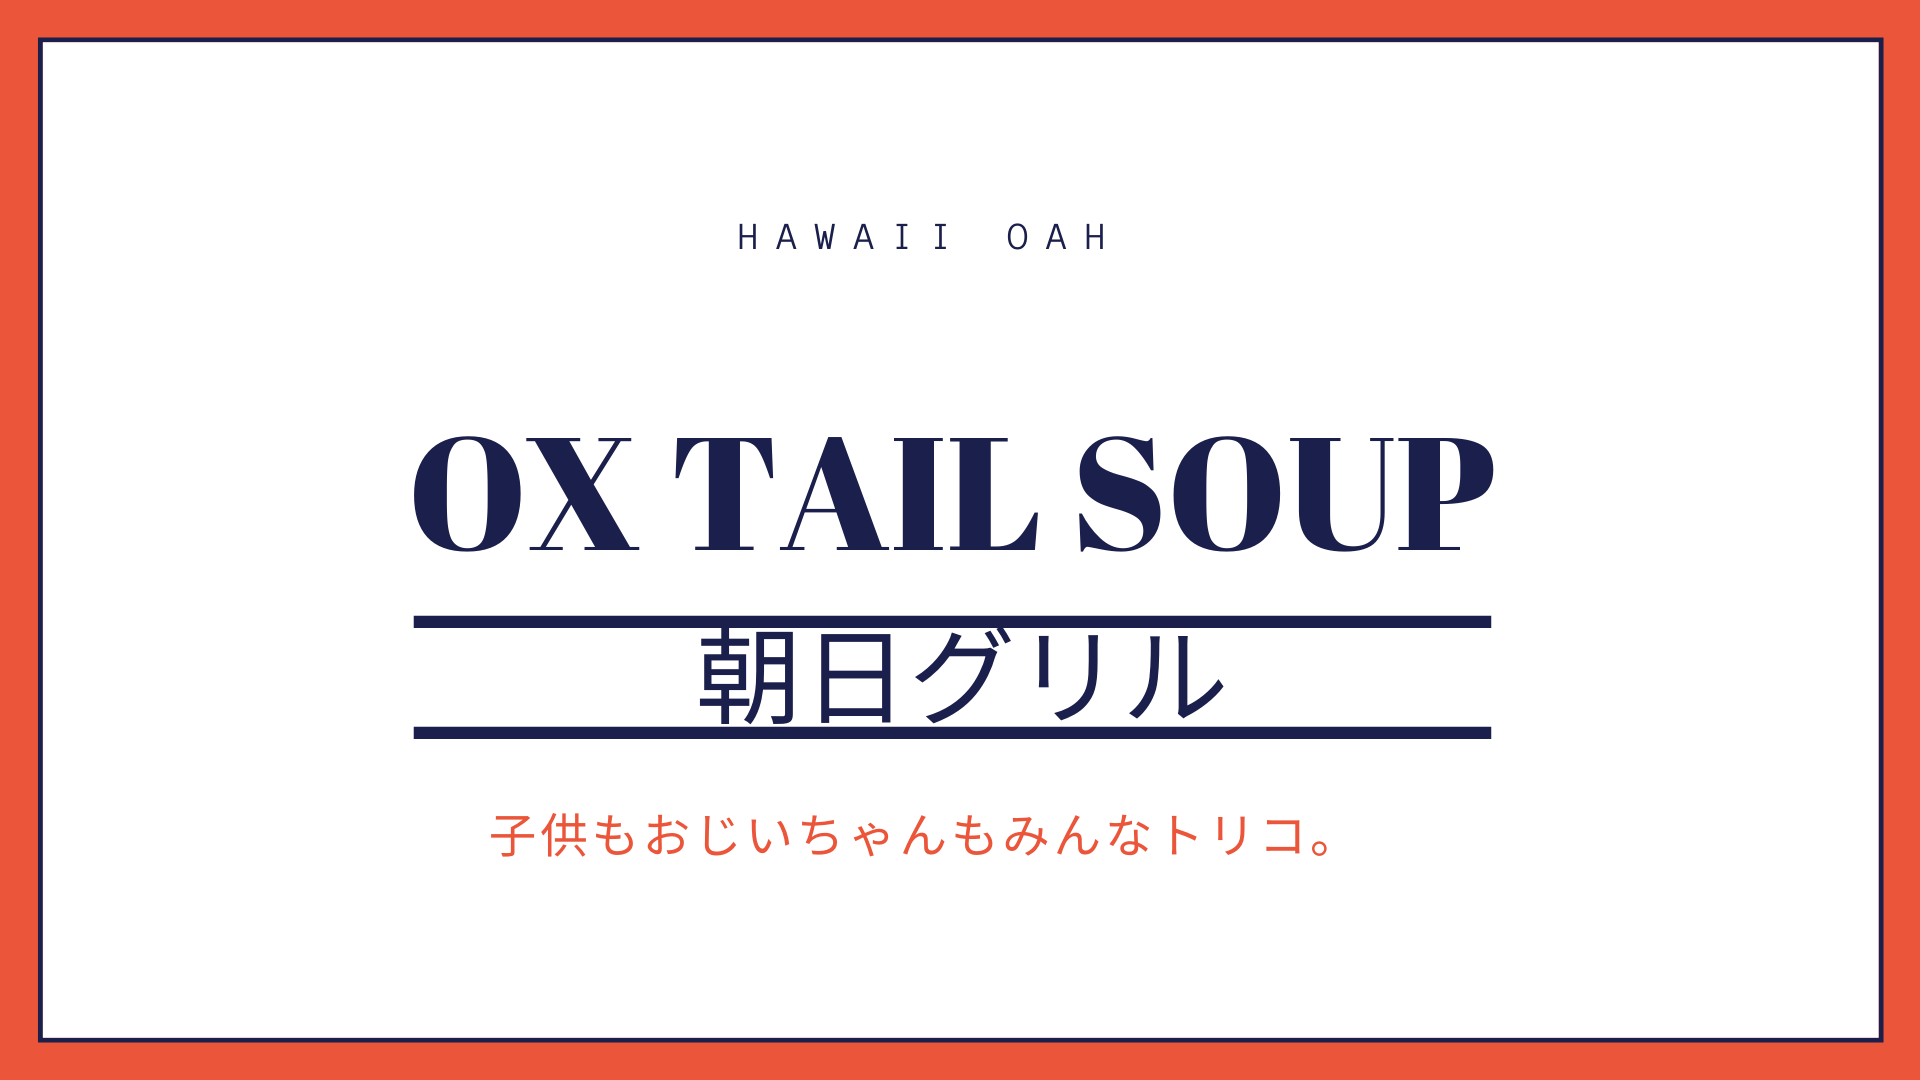 OxtailSoup